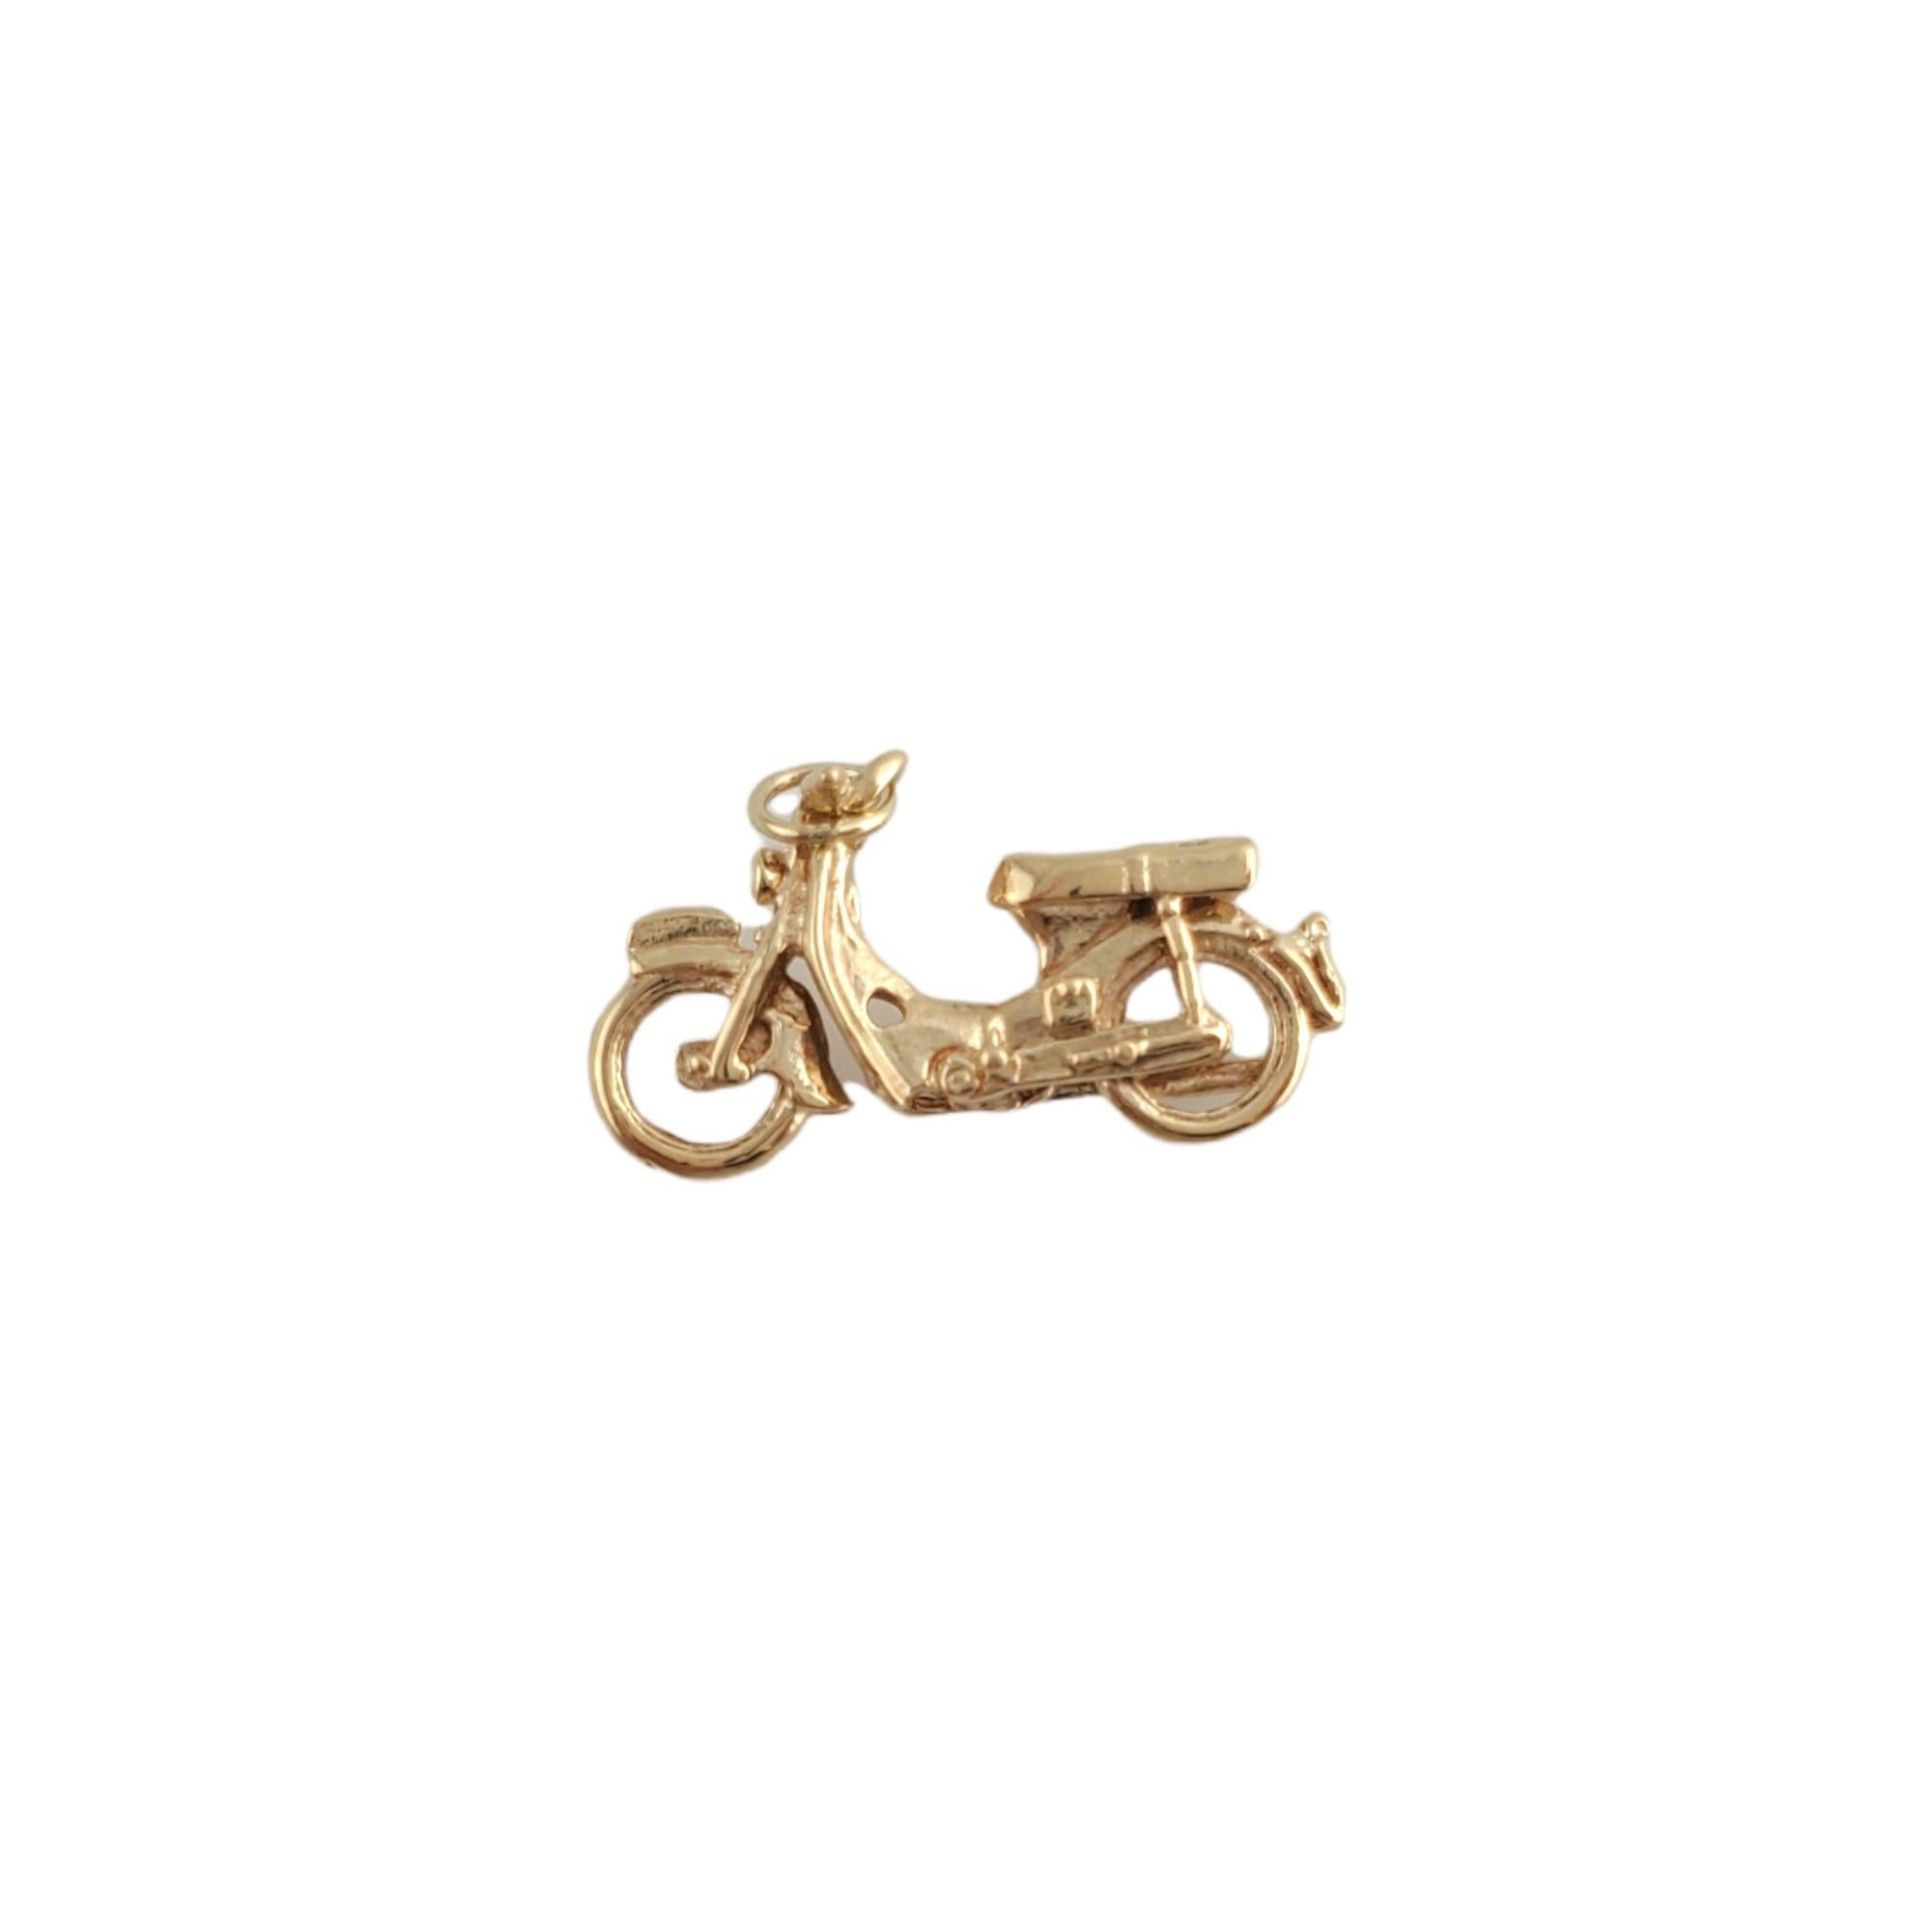 14K Yellow Gold Motorcycle Charm 

You'll love this beautiful yellow gold motorcycle charm! 

Size: 13.67mm X 24.38mm

Weight:  3.6gr /  2.3dwt

Very good condition, professionally polished.

Will come packaged in a gift box and will be shipped U.S.